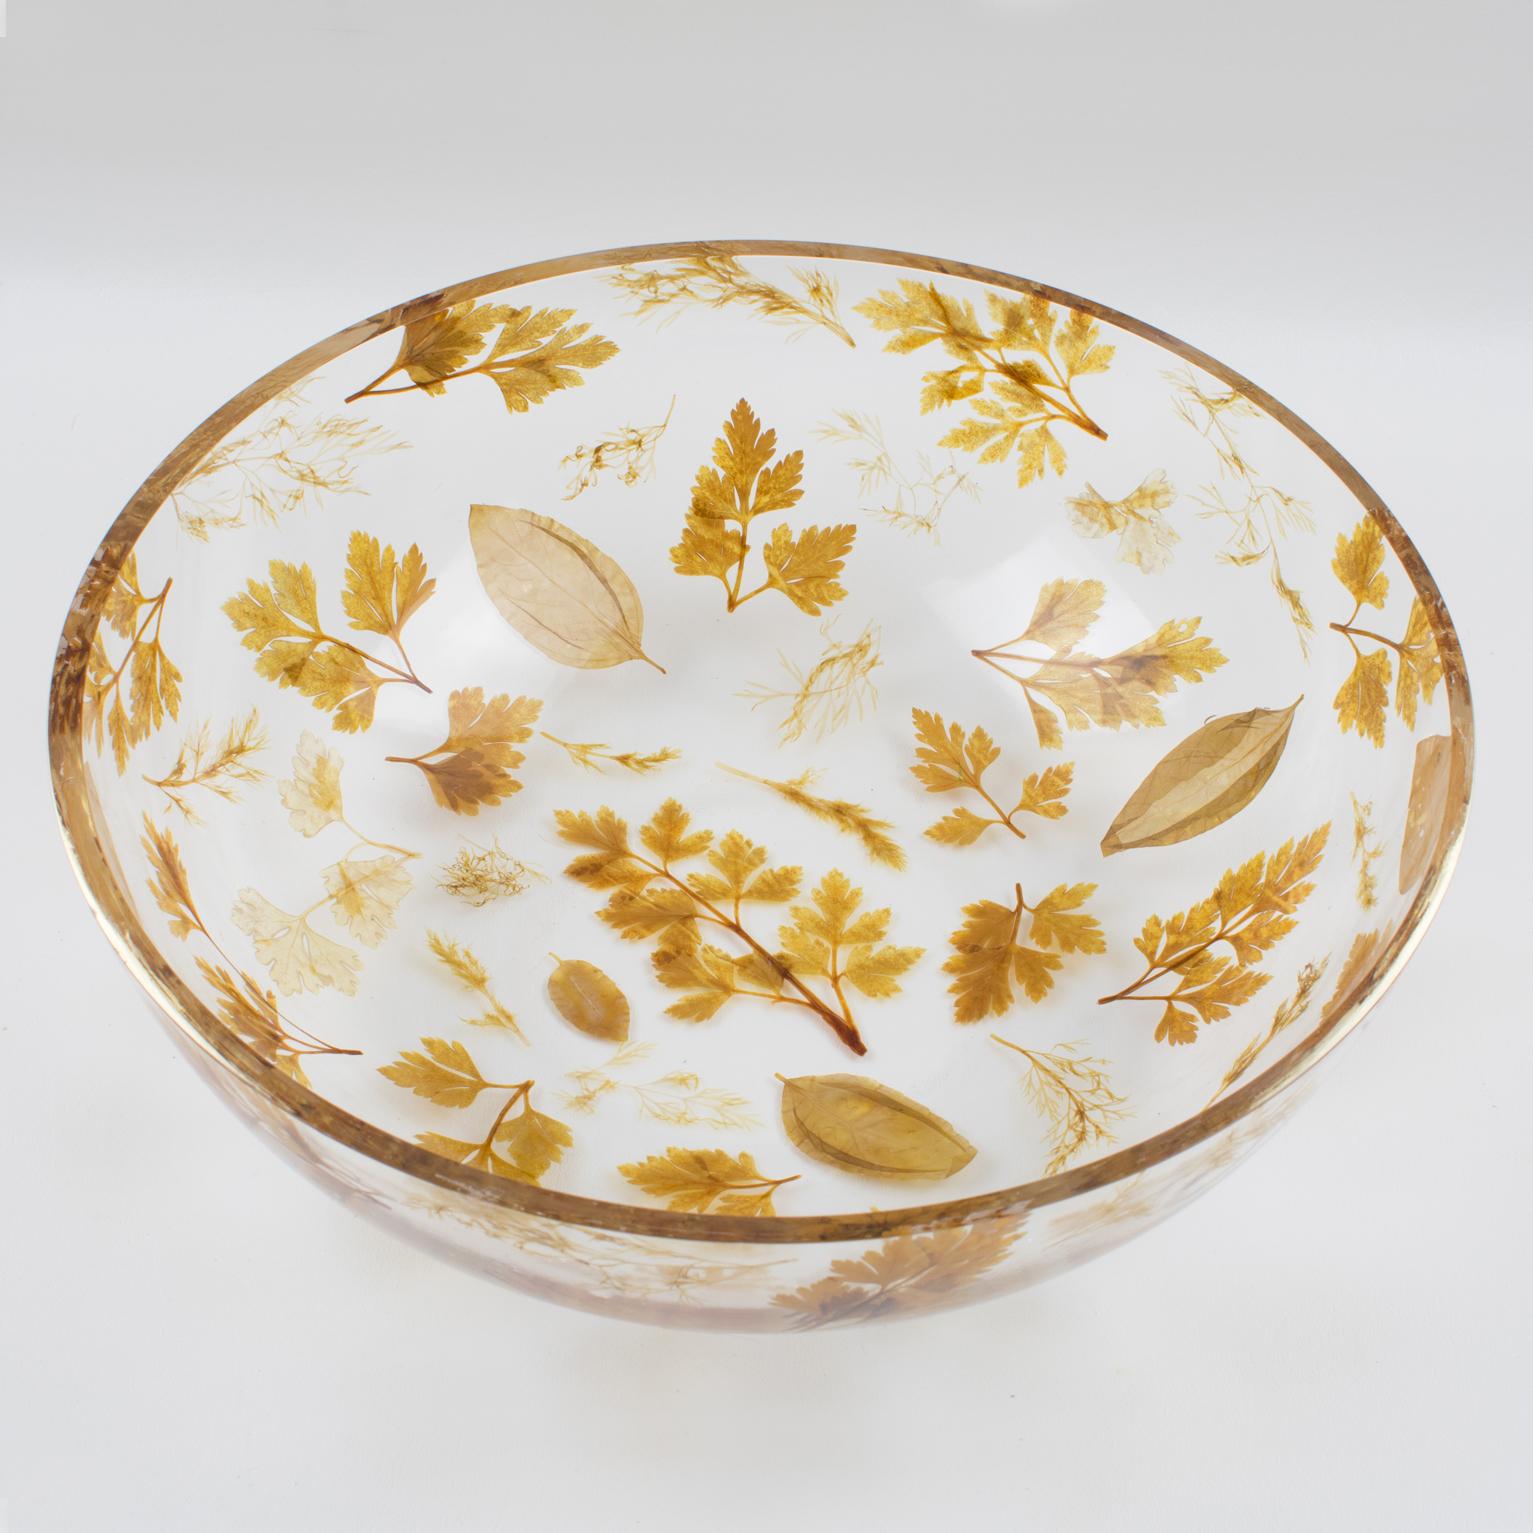 Italian Resin Centerpiece Serving Bowl with Leaves Inclusions, Italy 1970s